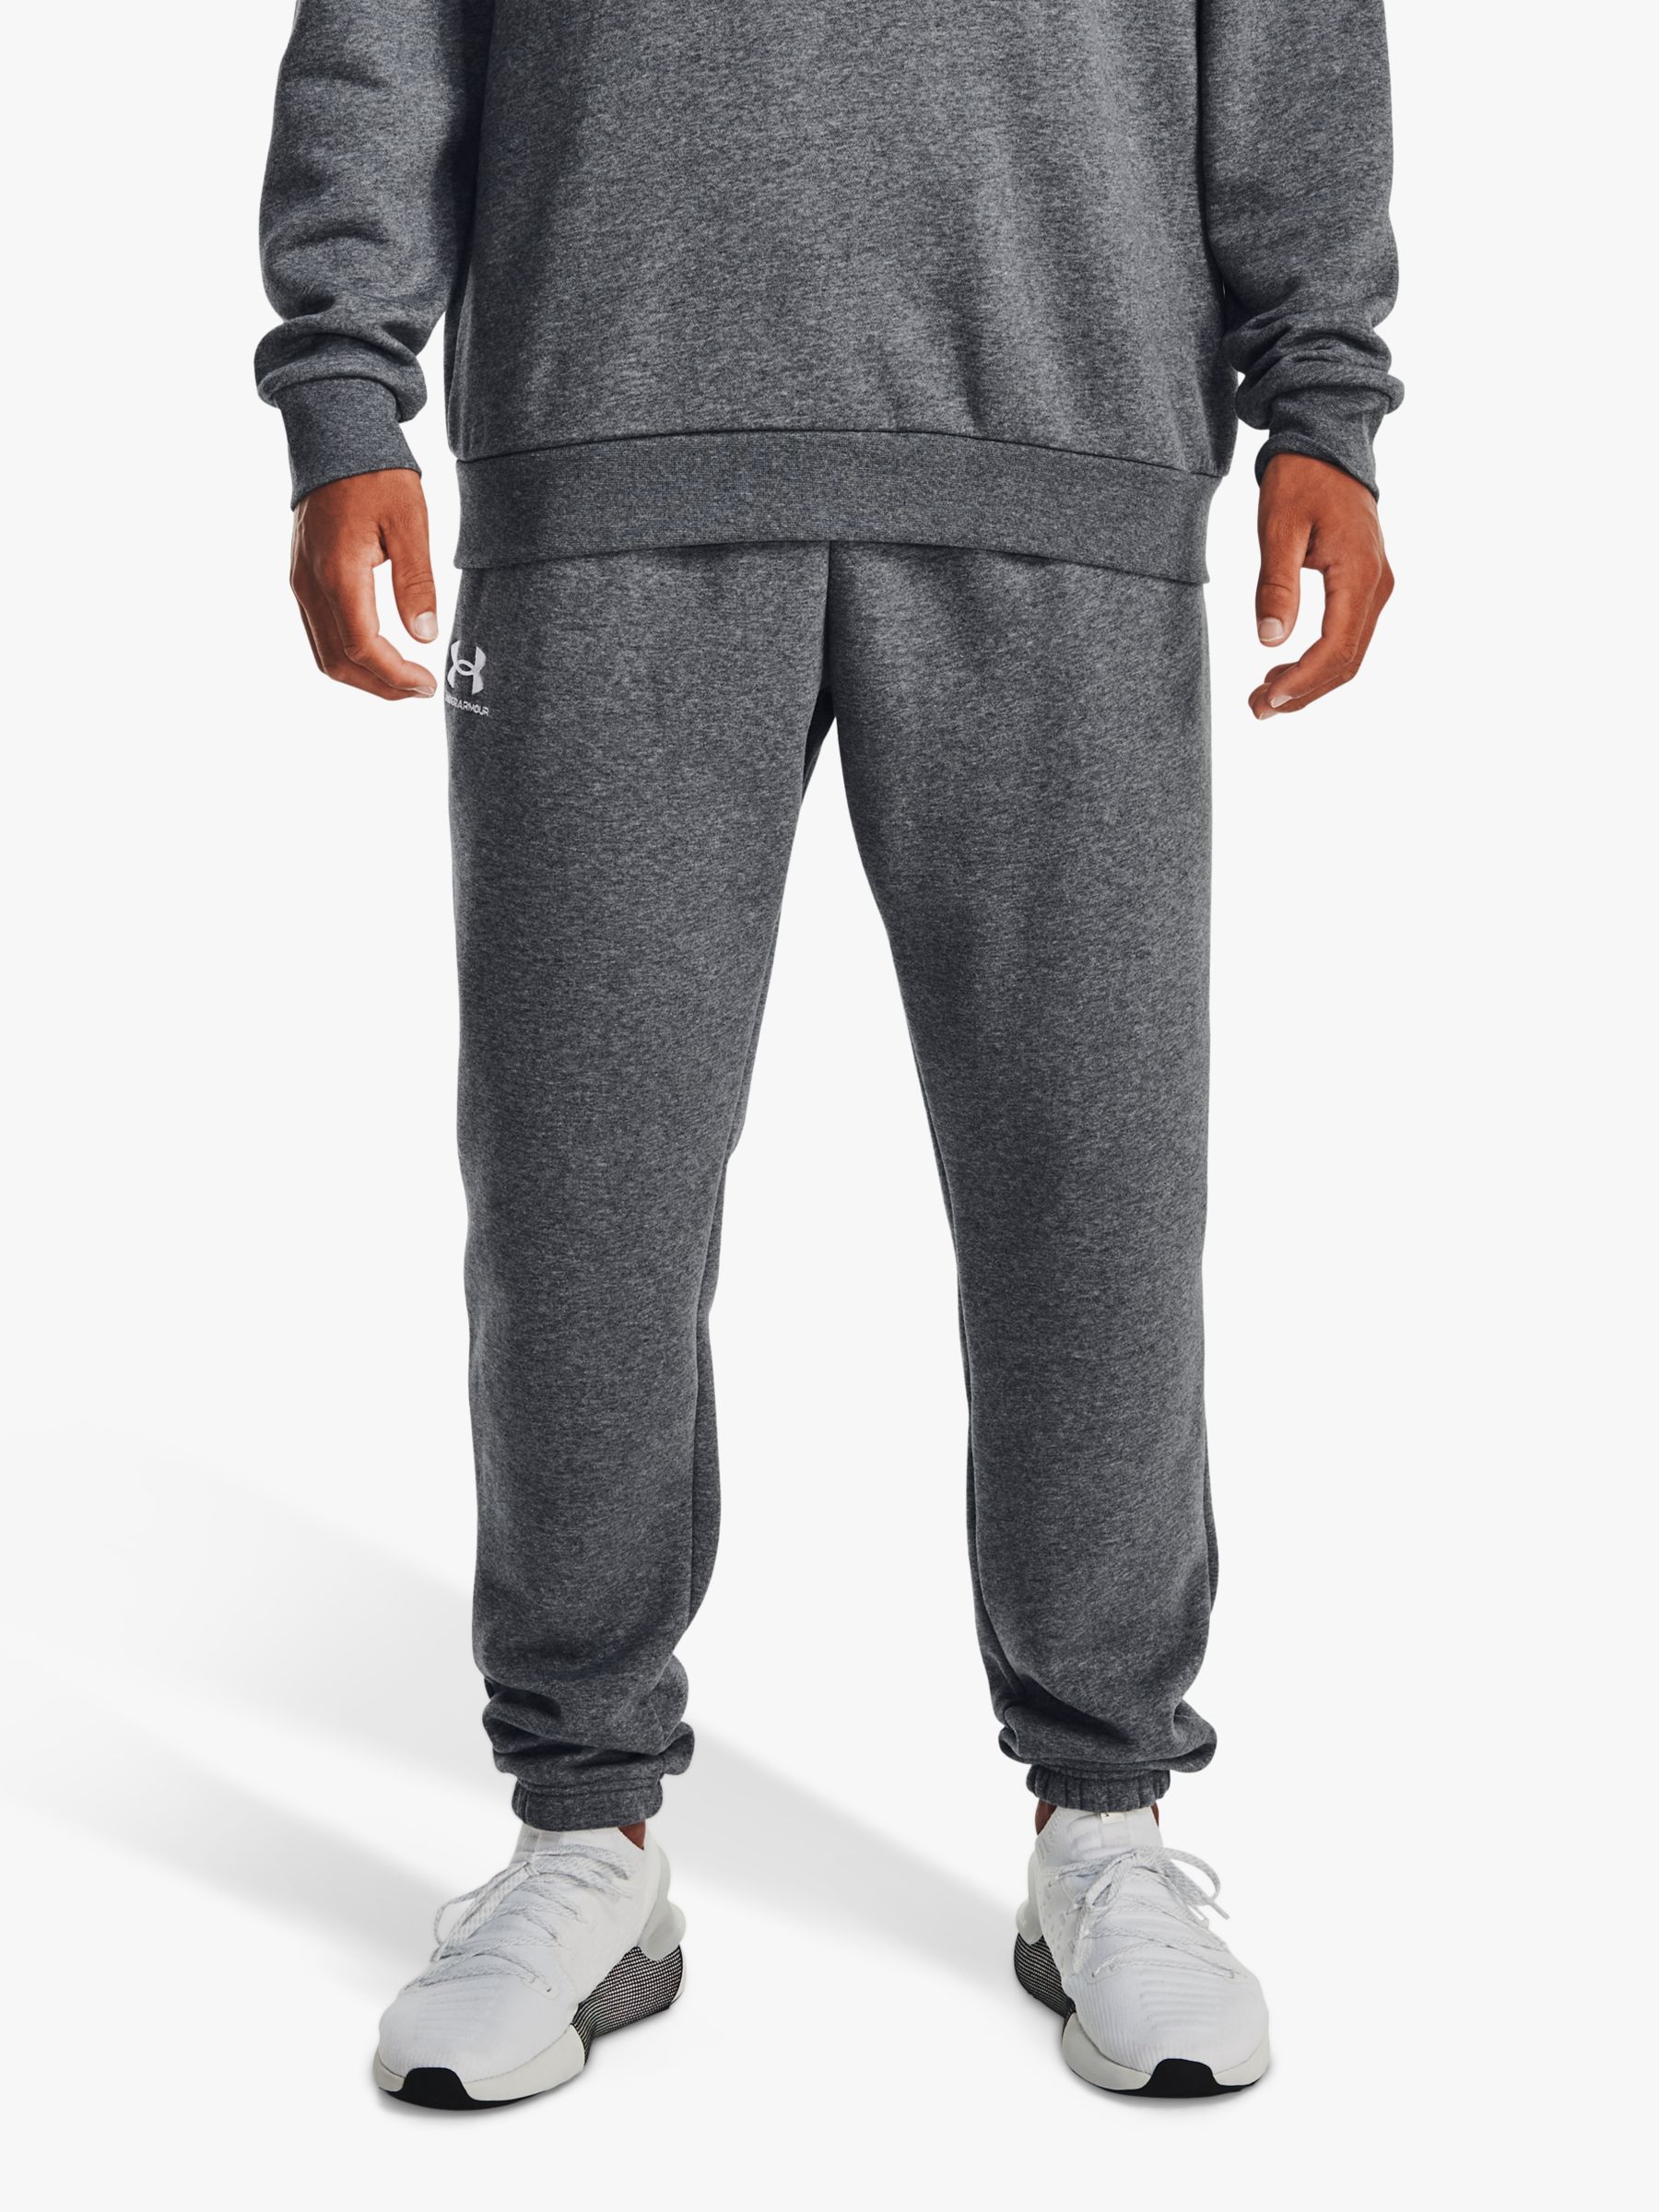 Levi's Men's Relaxed Fit Tapered Leg Fleece Jogger Sweatpants